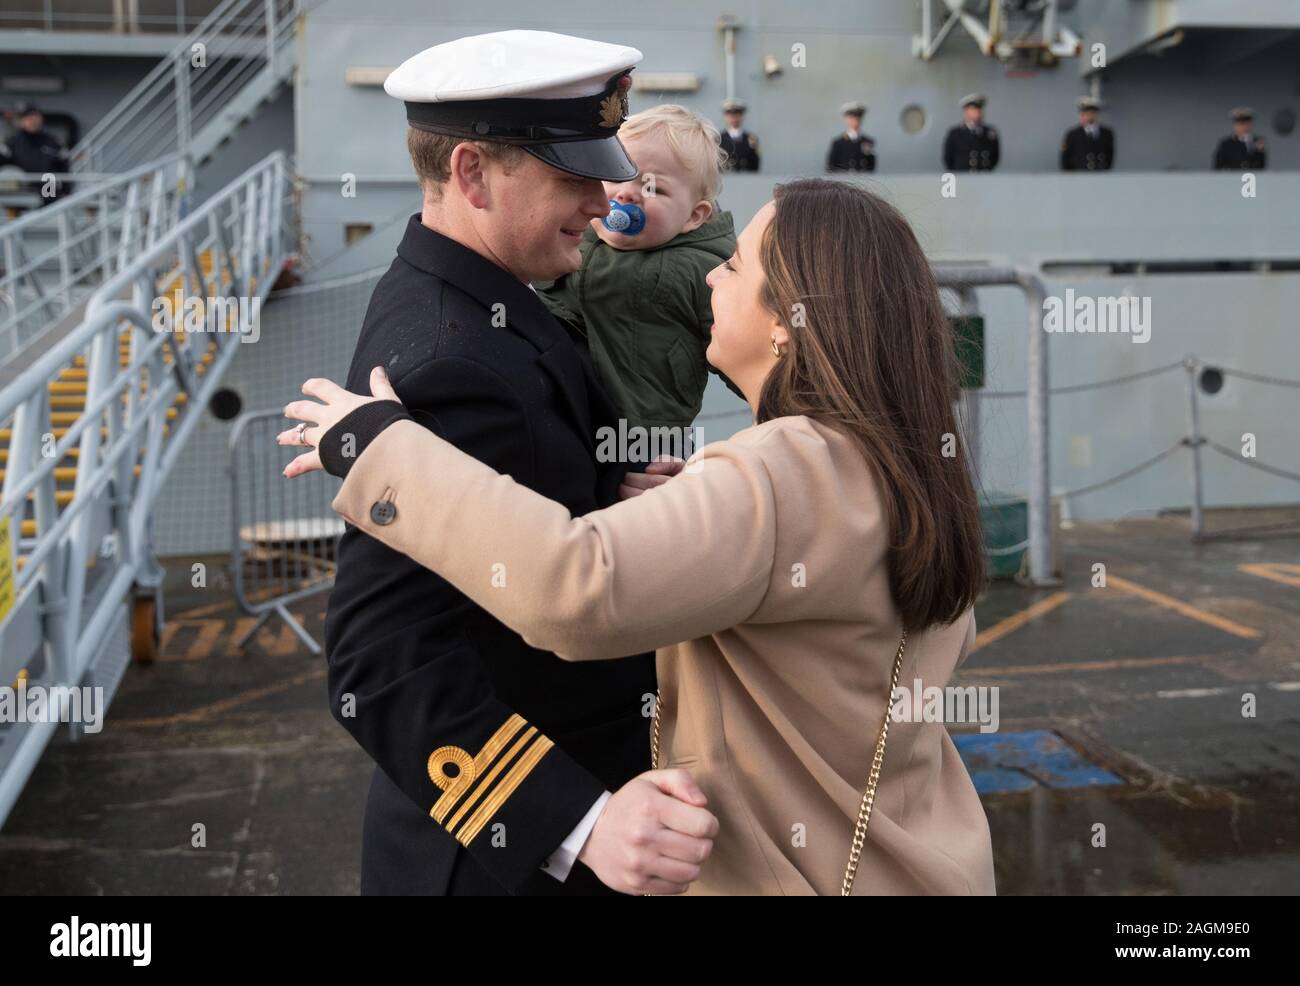 Lieutenant Commander Richard Skelton, Commanding Officer of HMS Clyde (left) embraces his wife Natalie and son Rory after he disembarked HMS Clyde following the ship's arrival back into Portsmouth for the first time in 12 years, ahead of her de-commissioning ceremony. Stock Photo